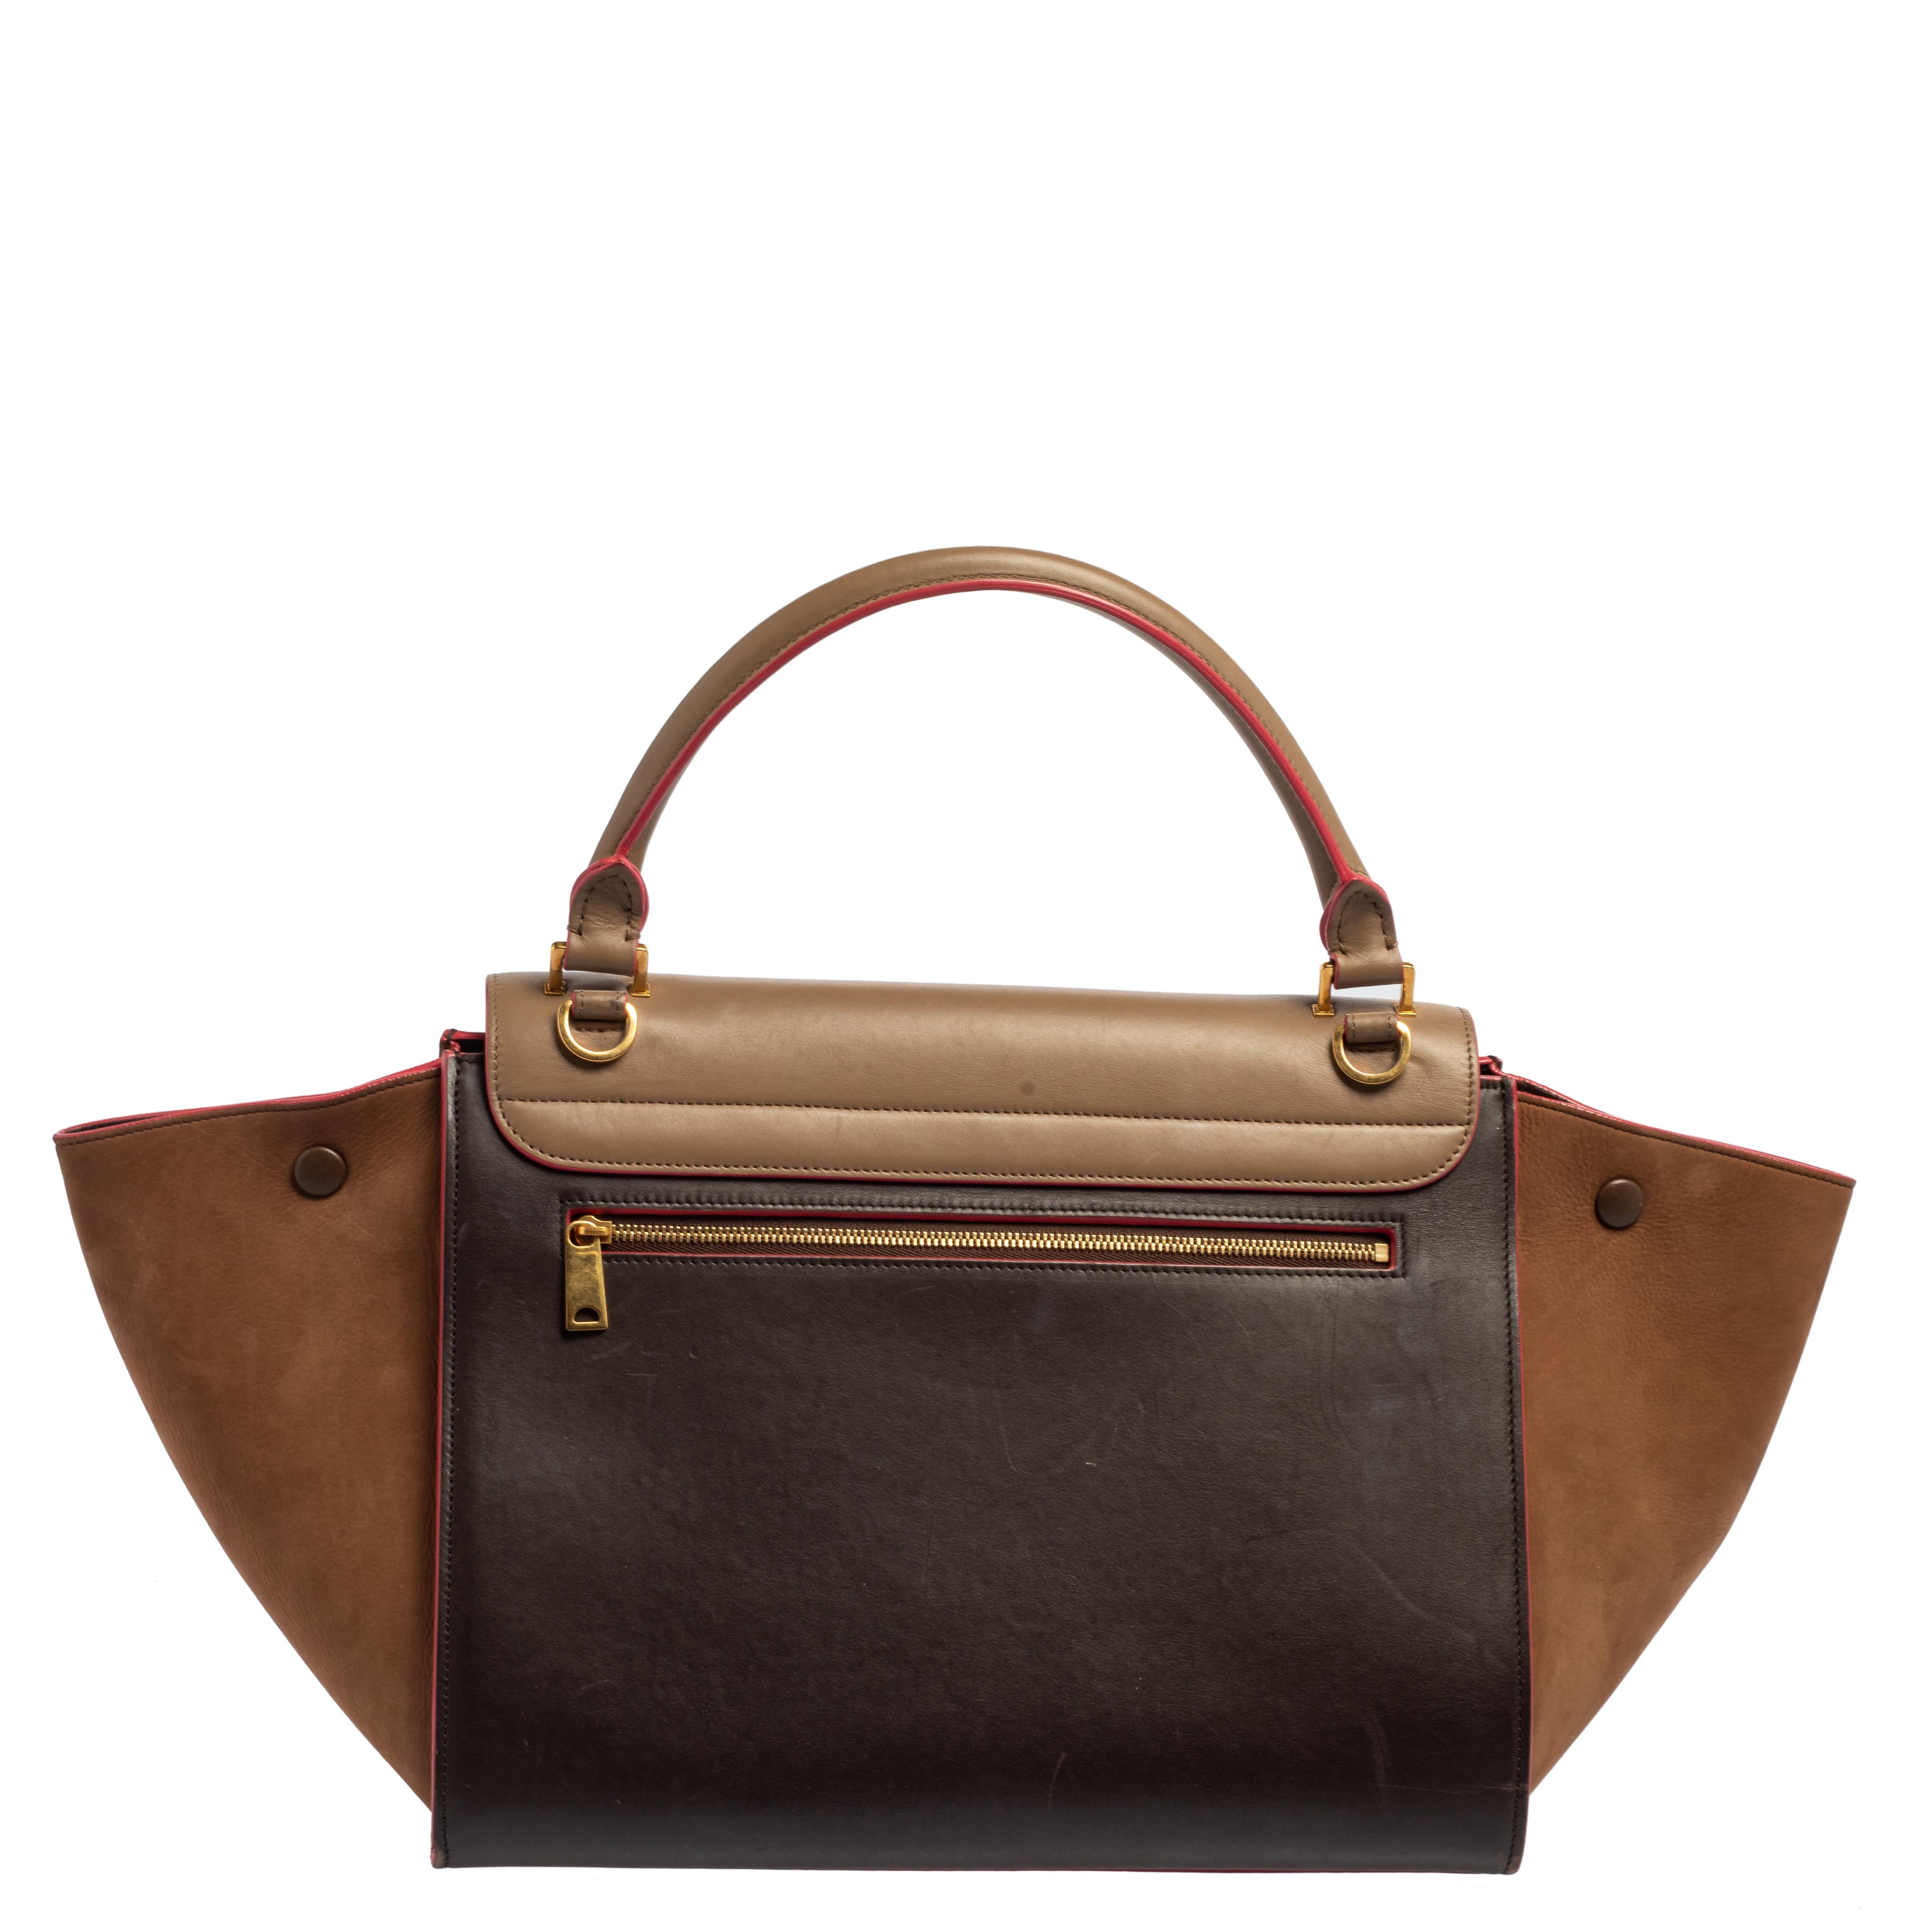 In every stride, swing, and twirl, your audience will gasp in admiration at the beautiful sight of this Celine bag. Crafted from nubuck and leather in Italy, the bag has a style that will catch glances from a mile. It has been designed with the